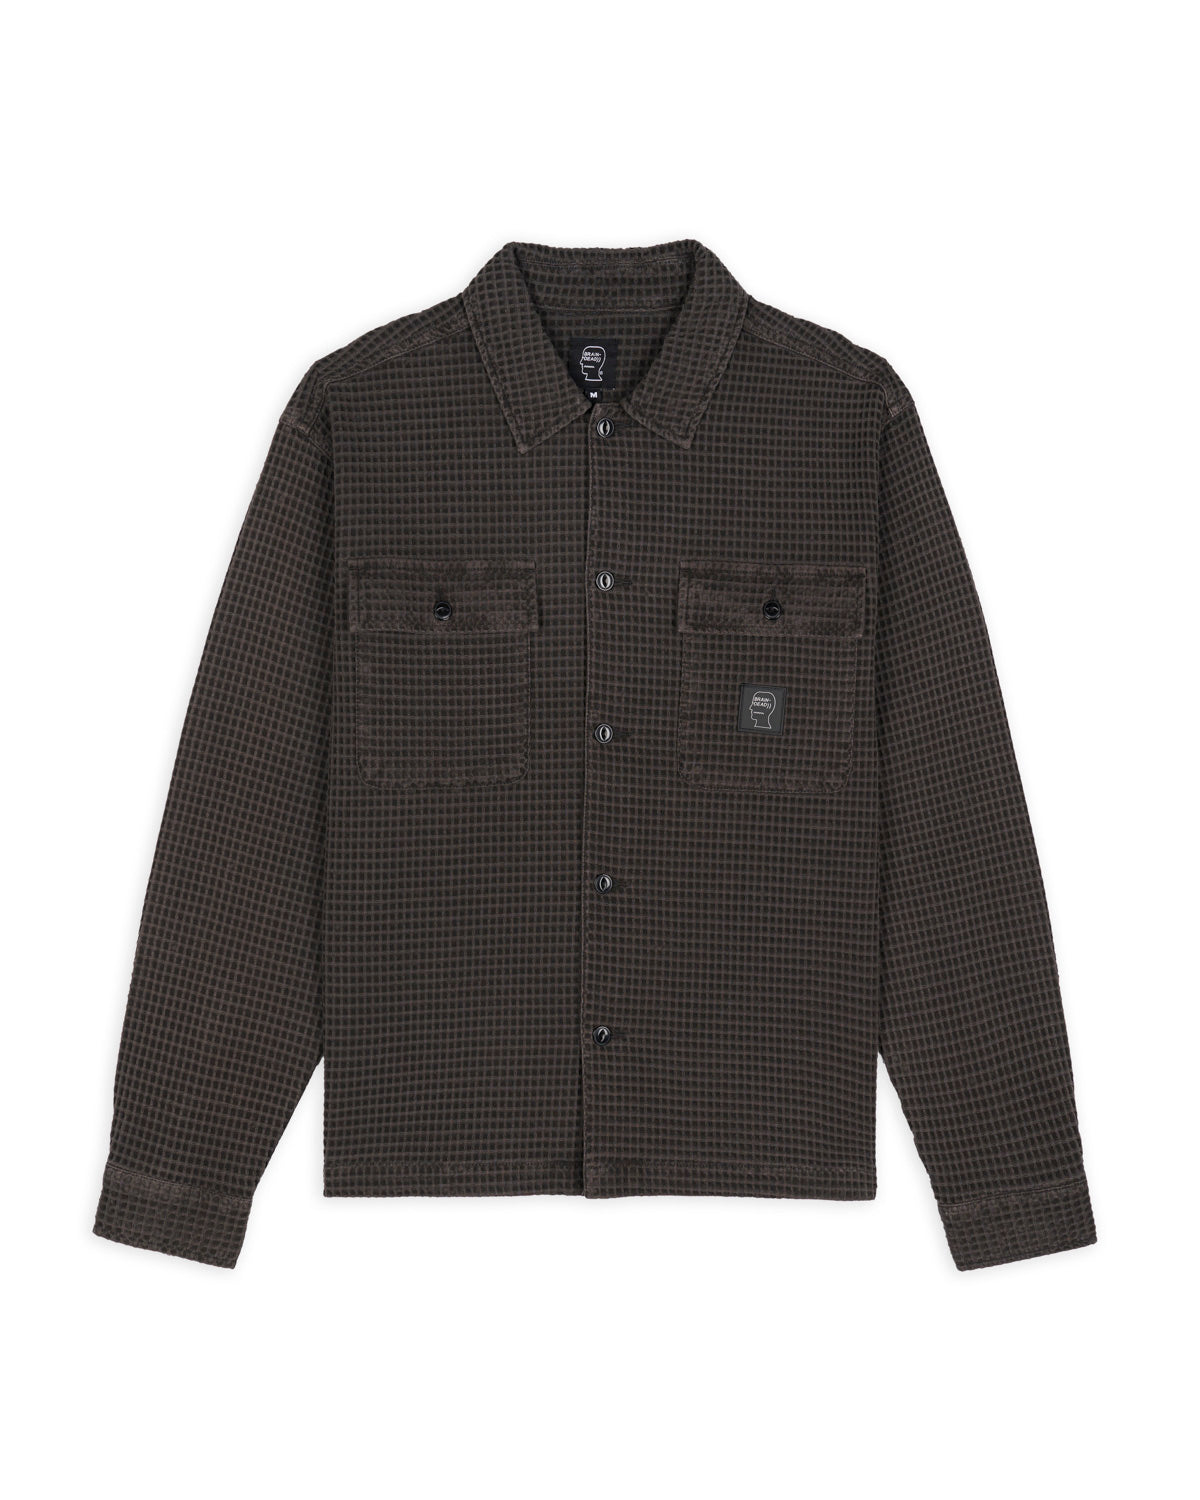 Textured Waffle Shirt - Charcoal – Privacy.clo